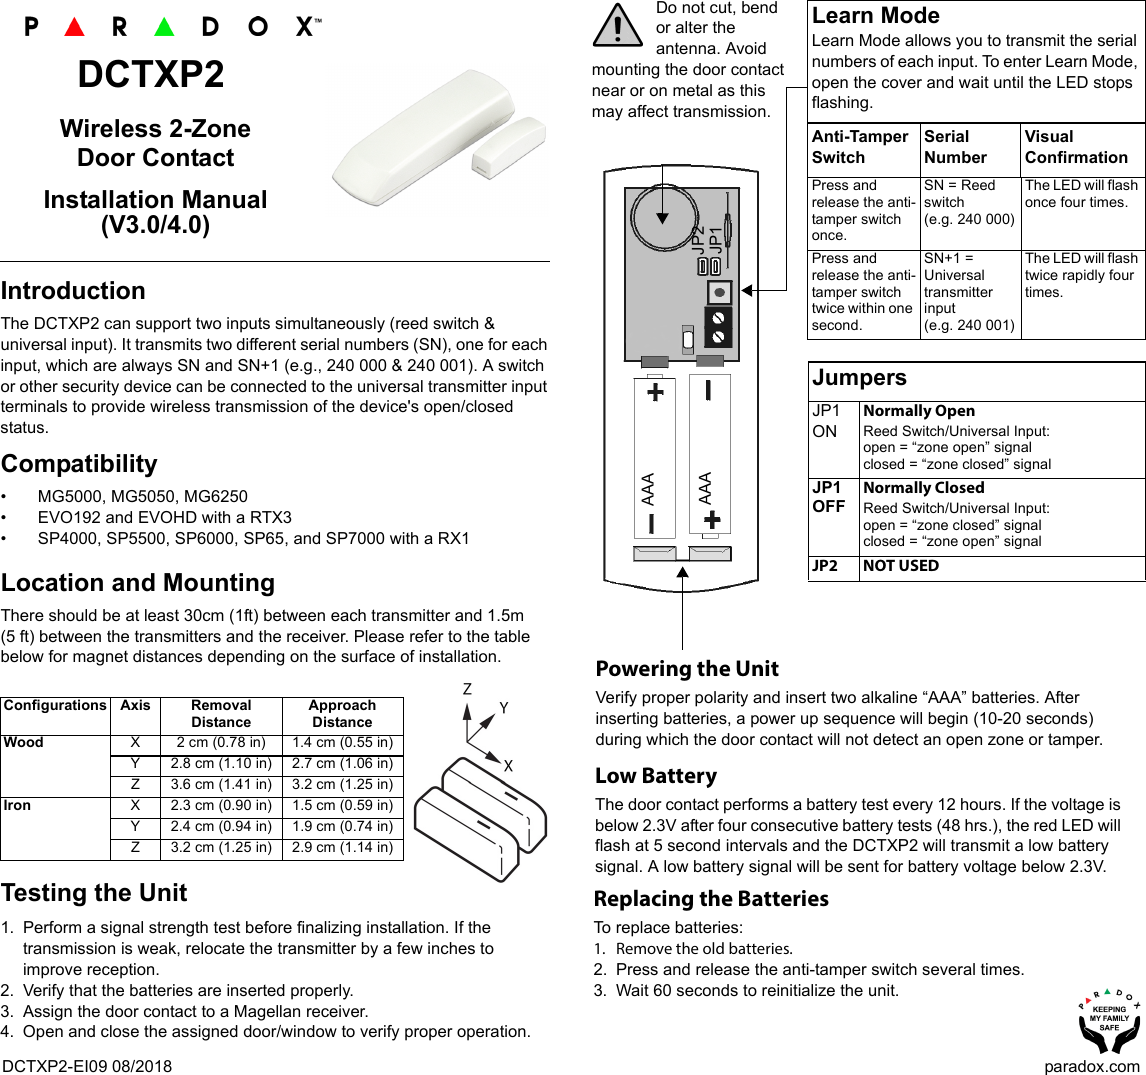 DCTXP2-EI09 08/2018 paradox.comDCTXP2Wireless 2-Zone Door ContactInstallation Manual (V3.0/4.0)IntroductionThe DCTXP2 can support two inputs simultaneously (reed switch &amp; universal input). It transmits two different serial numbers (SN), one for each input, which are always SN and SN+1 (e.g., 240 000 &amp; 240 001). A switch or other security device can be connected to the universal transmitter input terminals to provide wireless transmission of the device&apos;s open/closed status. Compatibility • MG5000, MG5050, MG6250• EVO192 and EVOHD with a RTX3• SP4000, SP5500, SP6000, SP65, and SP7000 with a RX1Location and MountingThere should be at least 30cm (1ft) between each transmitter and 1.5m (5 ft) between the transmitters and the receiver. Please refer to the table below for magnet distances depending on the surface of installation.Testing the Unit1. Perform a signal strength test before finalizing installation. If the transmission is weak, relocate the transmitter by a few inches to improve reception.2. Verify that the batteries are inserted properly.3. Assign the door contact to a Magellan receiver.4. Open and close the assigned door/window to verify proper operation.Configurations Axis Removal Distance Approach DistanceWood X 2 cm (0.78 in) 1.4 cm (0.55 in)Y 2.8 cm (1.10 in) 2.7 cm (1.06 in)Z 3.6 cm (1.41 in) 3.2 cm (1.25 in)Iron X 2.3 cm (0.90 in) 1.5 cm (0.59 in)Y 2.4 cm (0.94 in) 1.9 cm (0.74 in)Z 3.2 cm (1.25 in) 2.9 cm (1.14 in)Do not cut, bend or alter the antenna. Avoid mounting the door contact near or on metal as this may affect transmission.JumpersJP1 ONNormally OpenReed Switch/Universal Input:open = “zone open” signalclosed = “zone closed” signalJP1 OFFNormally ClosedReed Switch/Universal Input:open = “zone closed” signalclosed = “zone open” signal            JP2 NOT USEDLearn ModeLearn Mode allows you to transmit the serial numbers of each input. To enter Learn Mode, open the cover and wait until the LED stops flashing. Anti-Tamper SwitchSerial NumberVisual ConfirmationPress and release the anti-tamper switch once.SN = Reed switch(e.g. 240 000)The LED will flash once four times.Press and release the anti-tamper switch twice within one second.SN+1 = Universal transmitter input(e.g. 240 001)The LED will flash twice rapidly four times.Powering the UnitVerify proper polarity and insert two alkaline “AAA” batteries. After inserting batteries, a power up sequence will begin (10-20 seconds) during which the door contact will not detect an open zone or tamper.Replacing the BatteriesTo replace batteries:1. Remove the old batteries.2. Press and release the anti-tamper switch several times.3. Wait 60 seconds to reinitialize the unit.Low Battery The door contact performs a battery test every 12 hours. If the voltage is below 2.3V after four consecutive battery tests (48 hrs.), the red LED will flash at 5 second intervals and the DCTXP2 will transmit a low battery signal. A low battery signal will be sent for battery voltage below 2.3V.AAAAAA JP2JP1